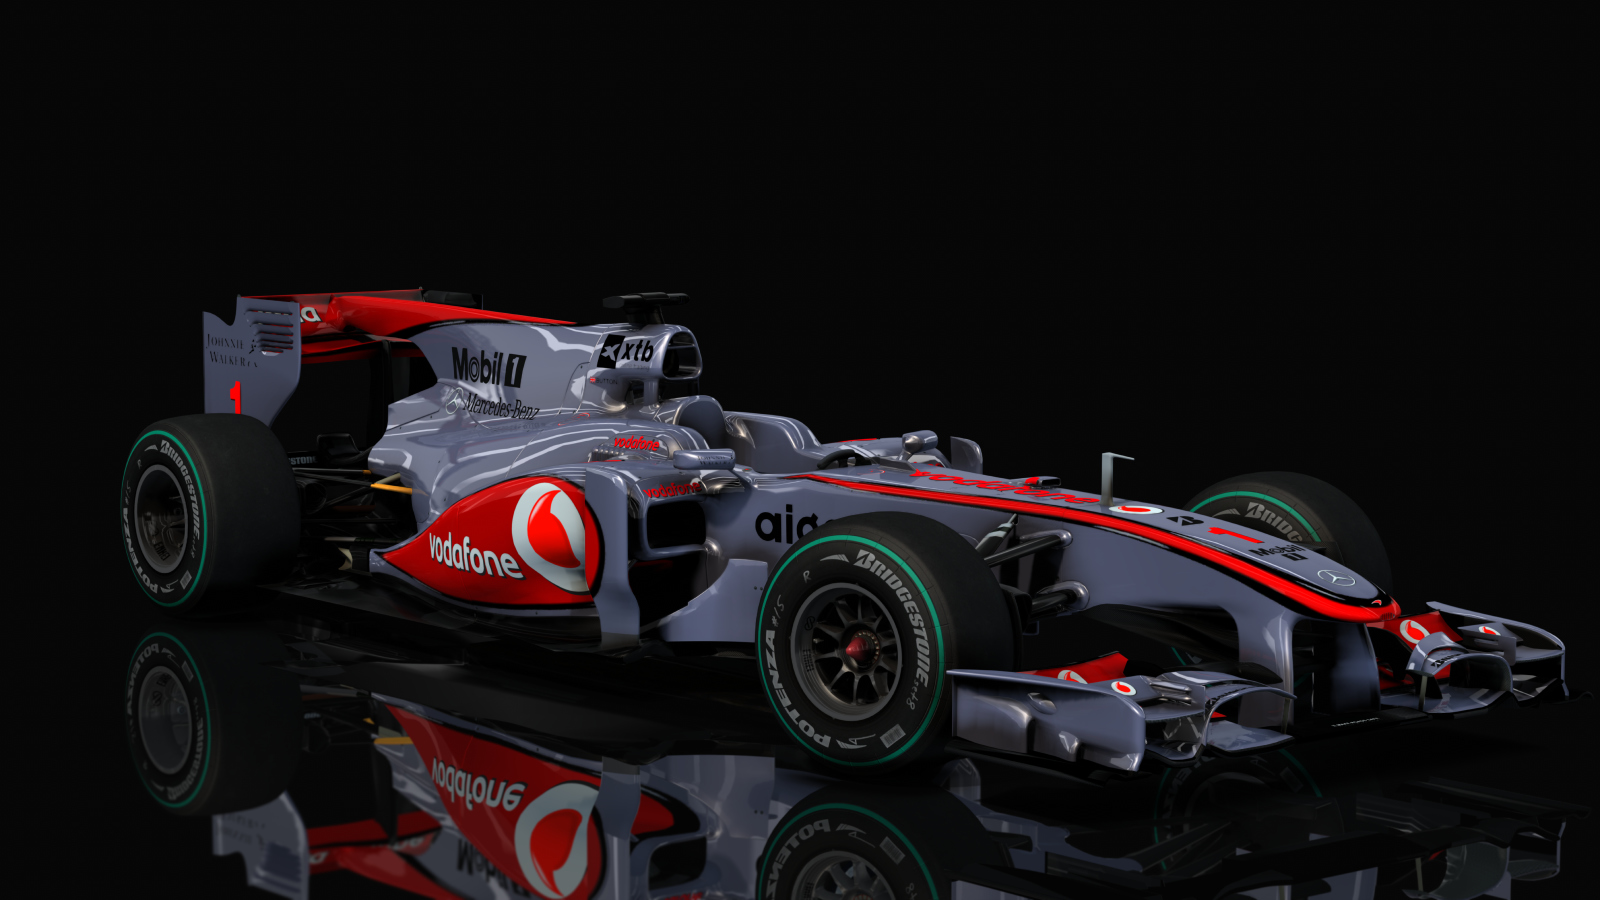 F1 2010 - Mclaren MP4-25 Preview Image